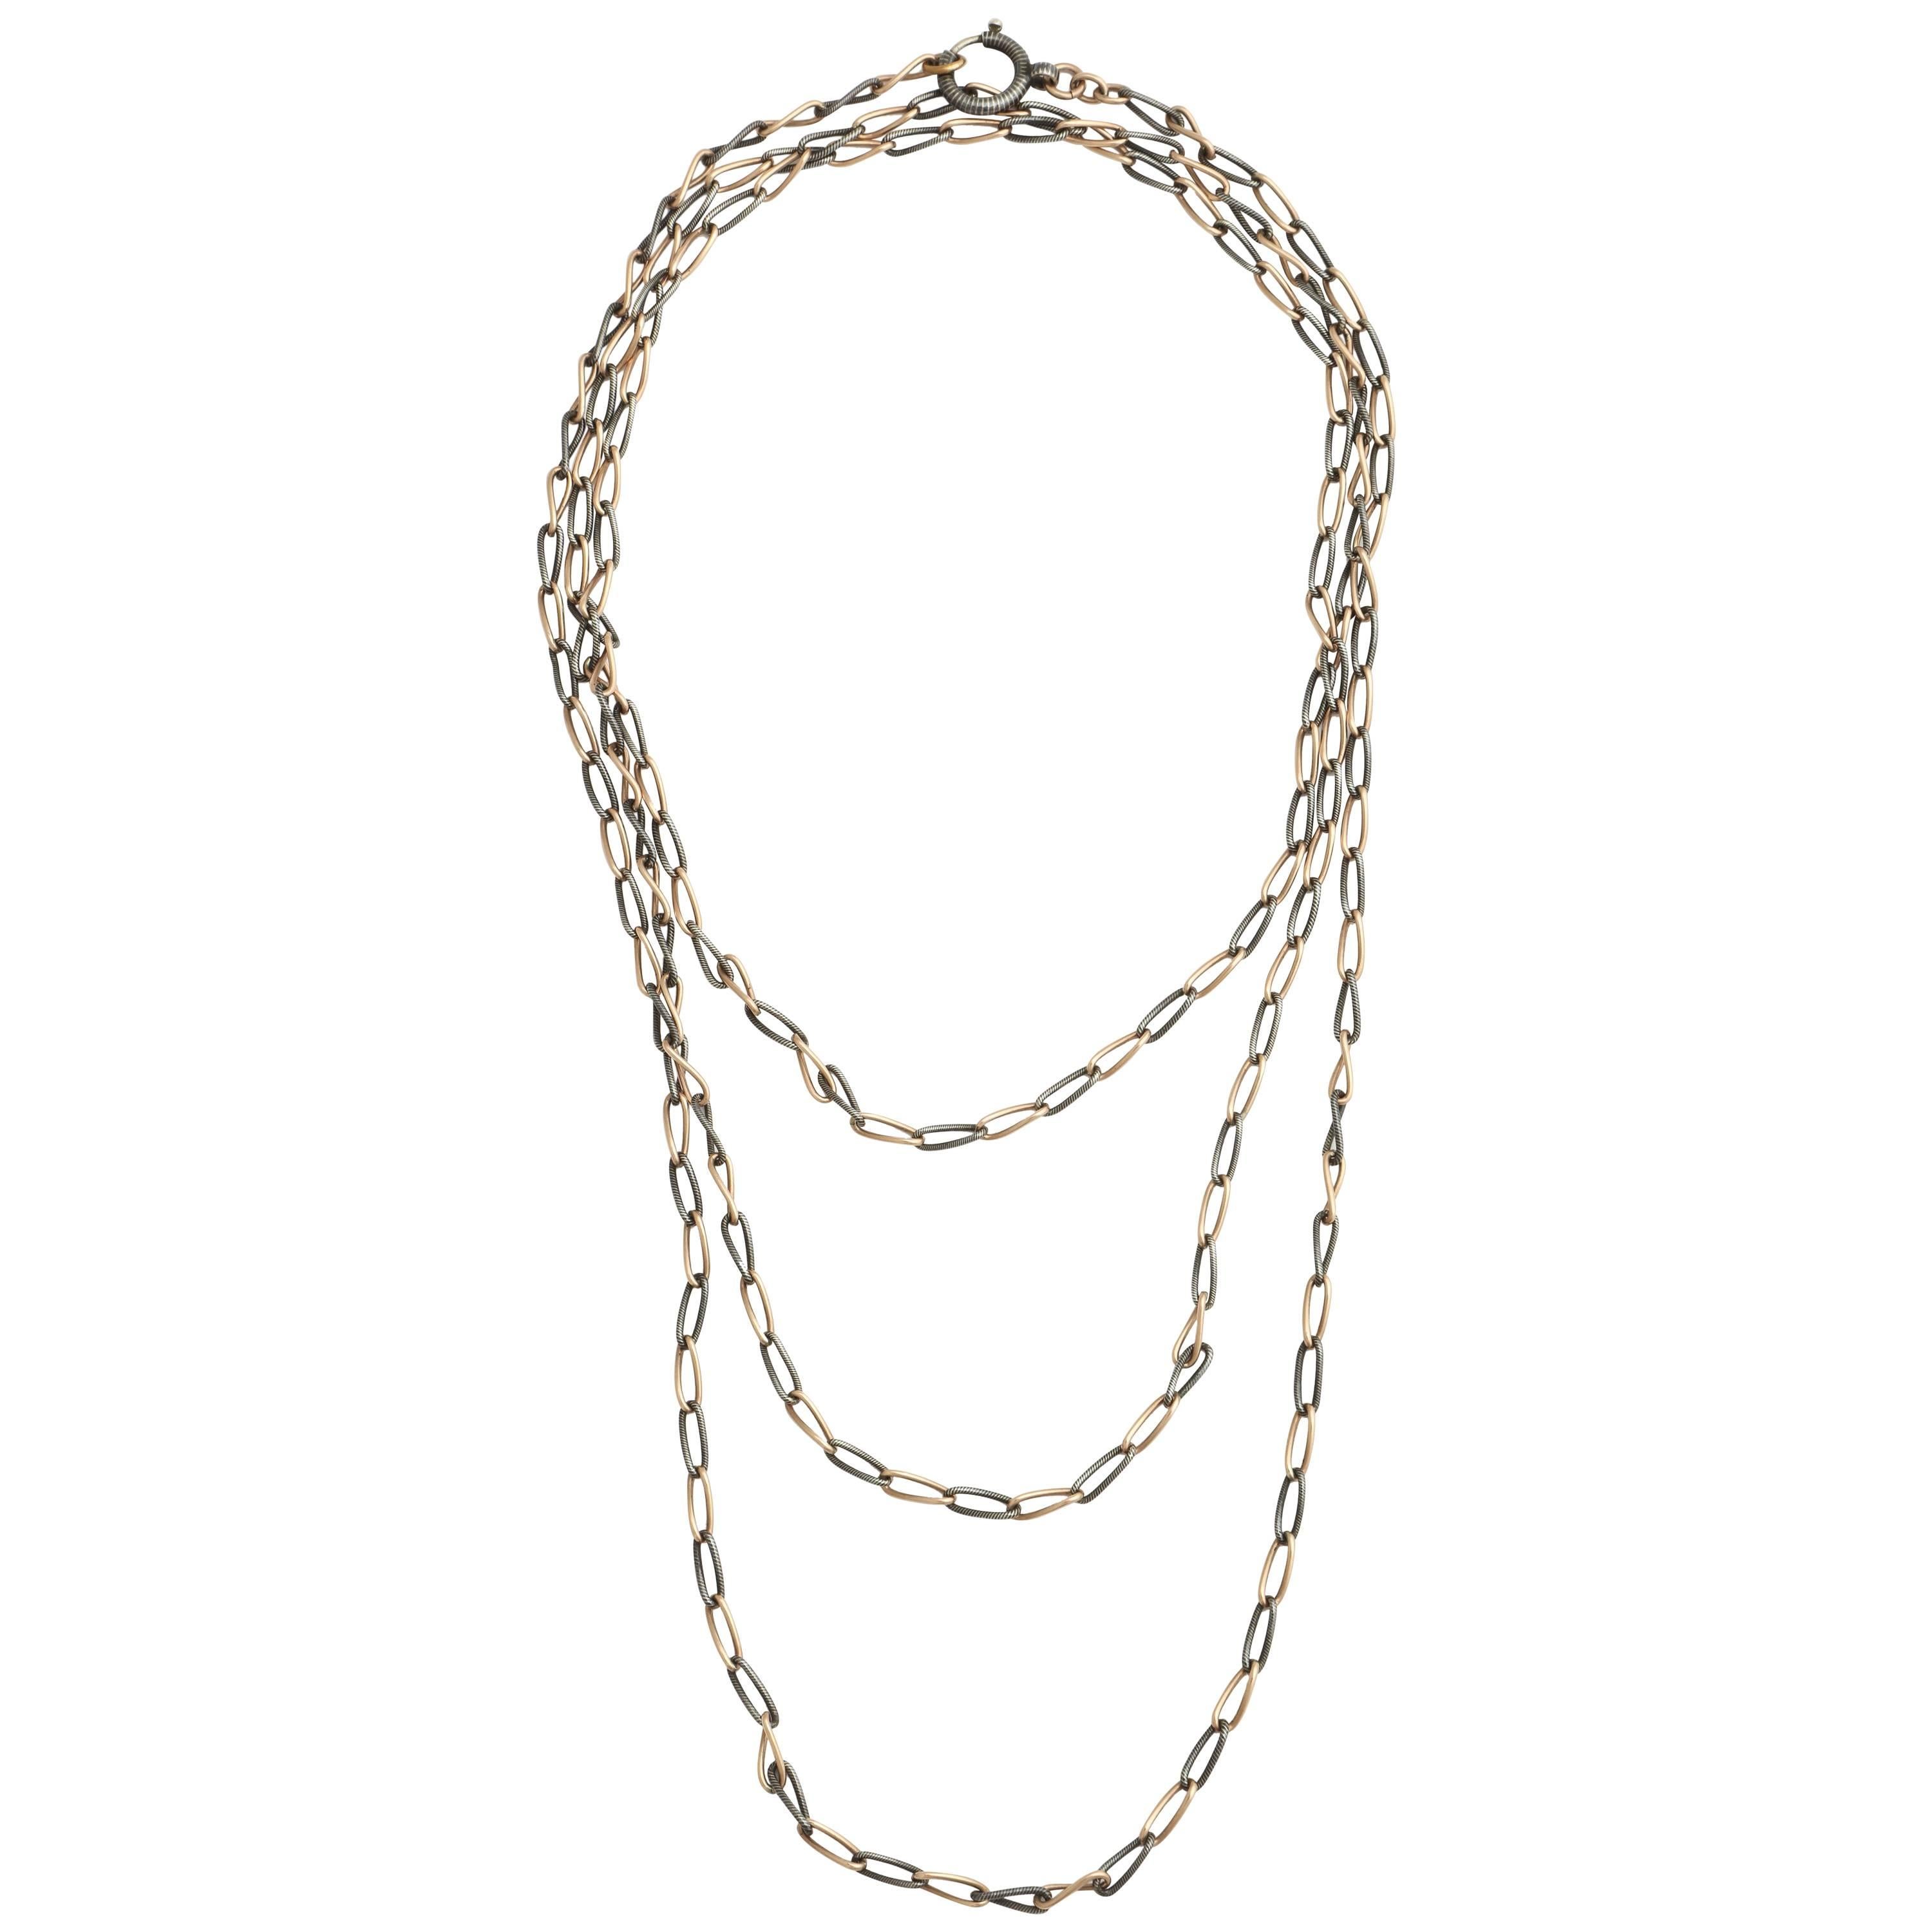 Fantastic Extra Long Victorian Niello Chain For Sale